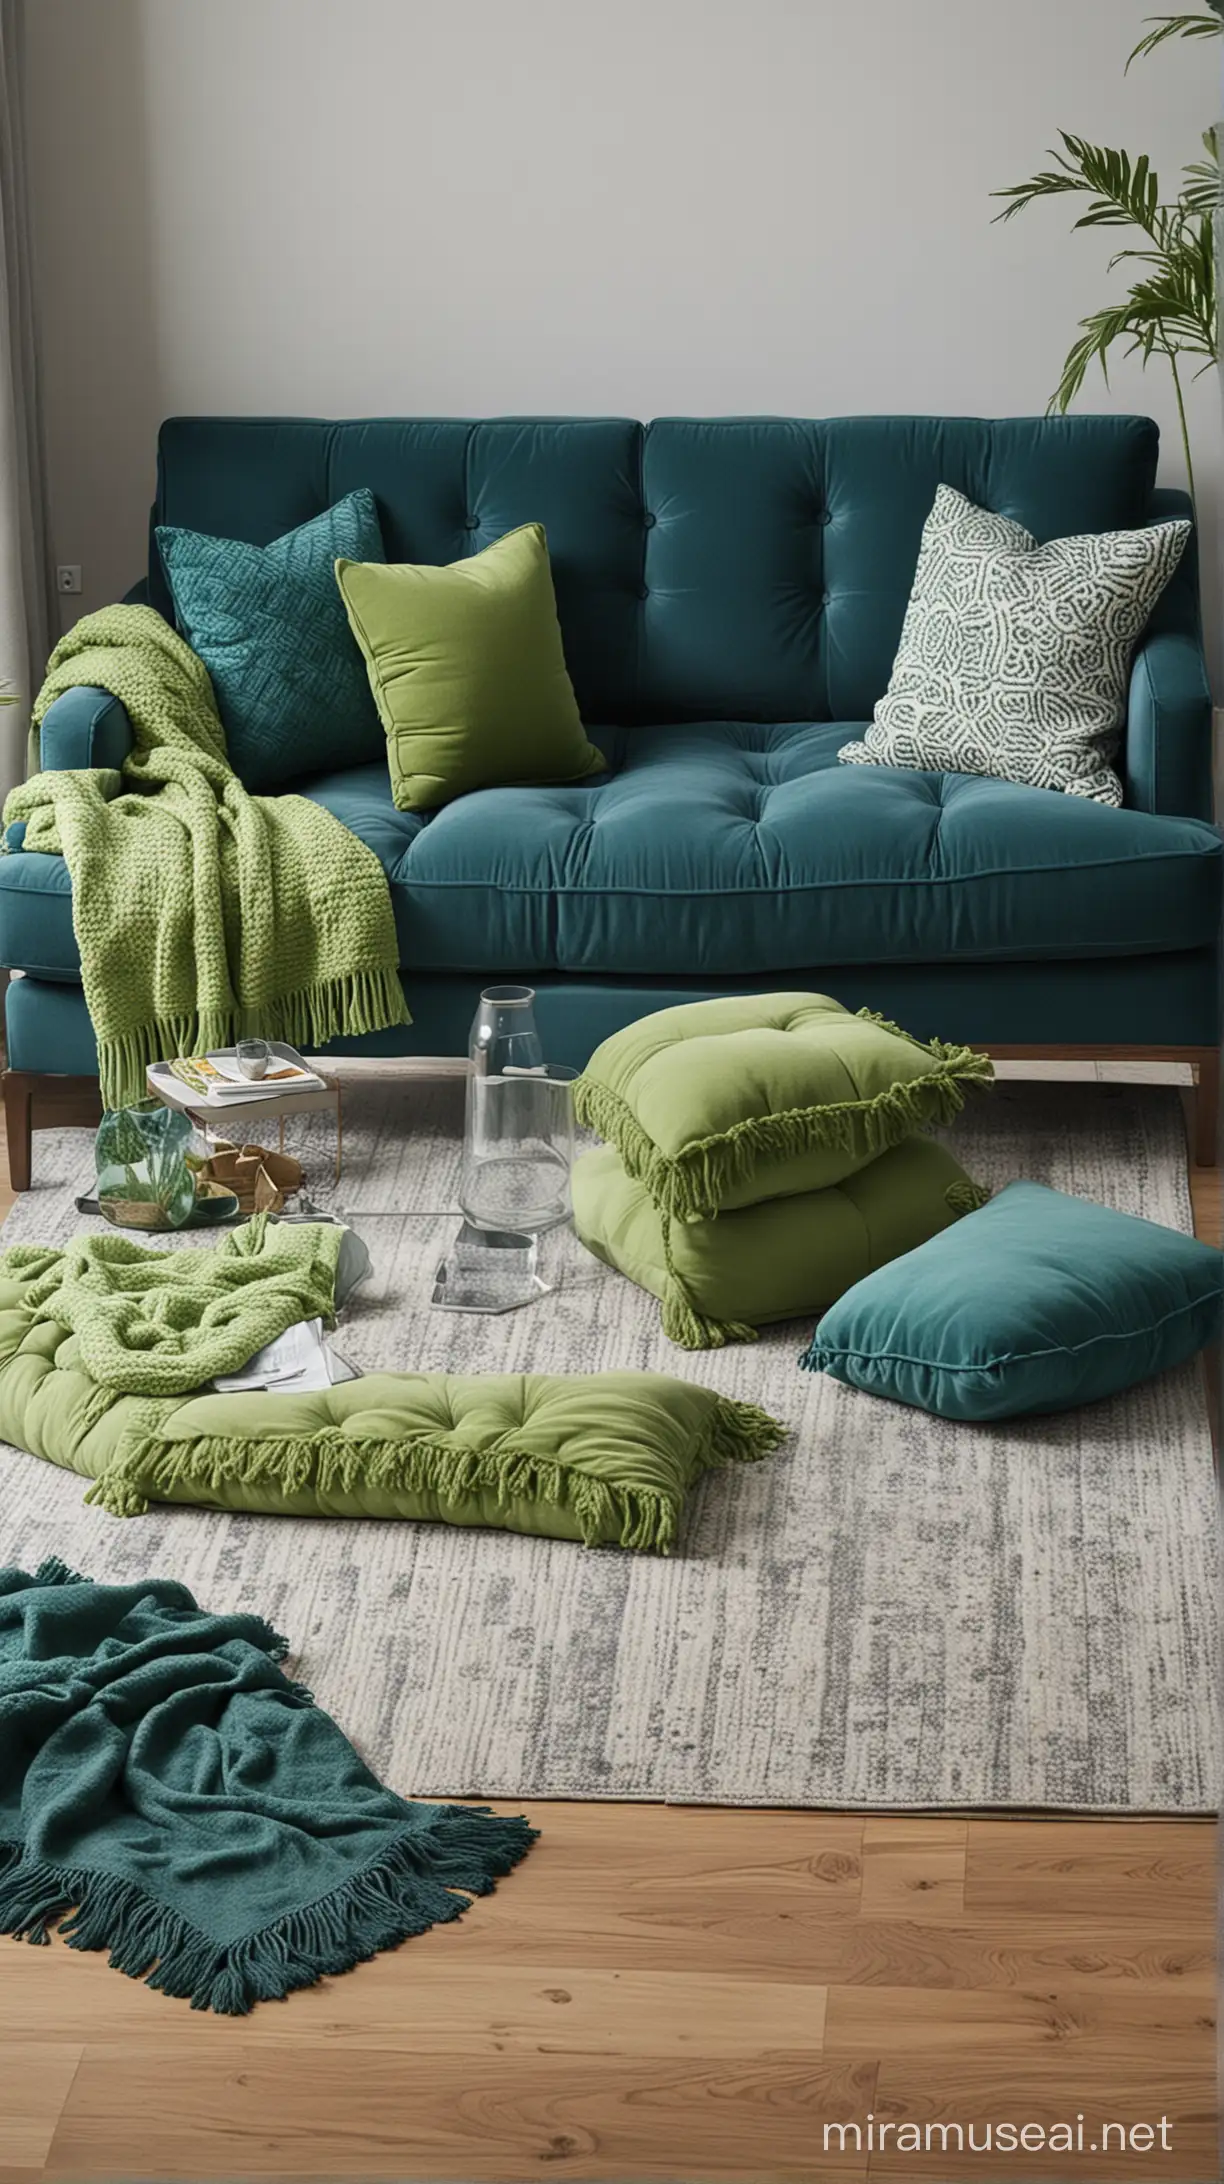 Blue Sofas with Green Throws Stylish Living Room Decor Idea